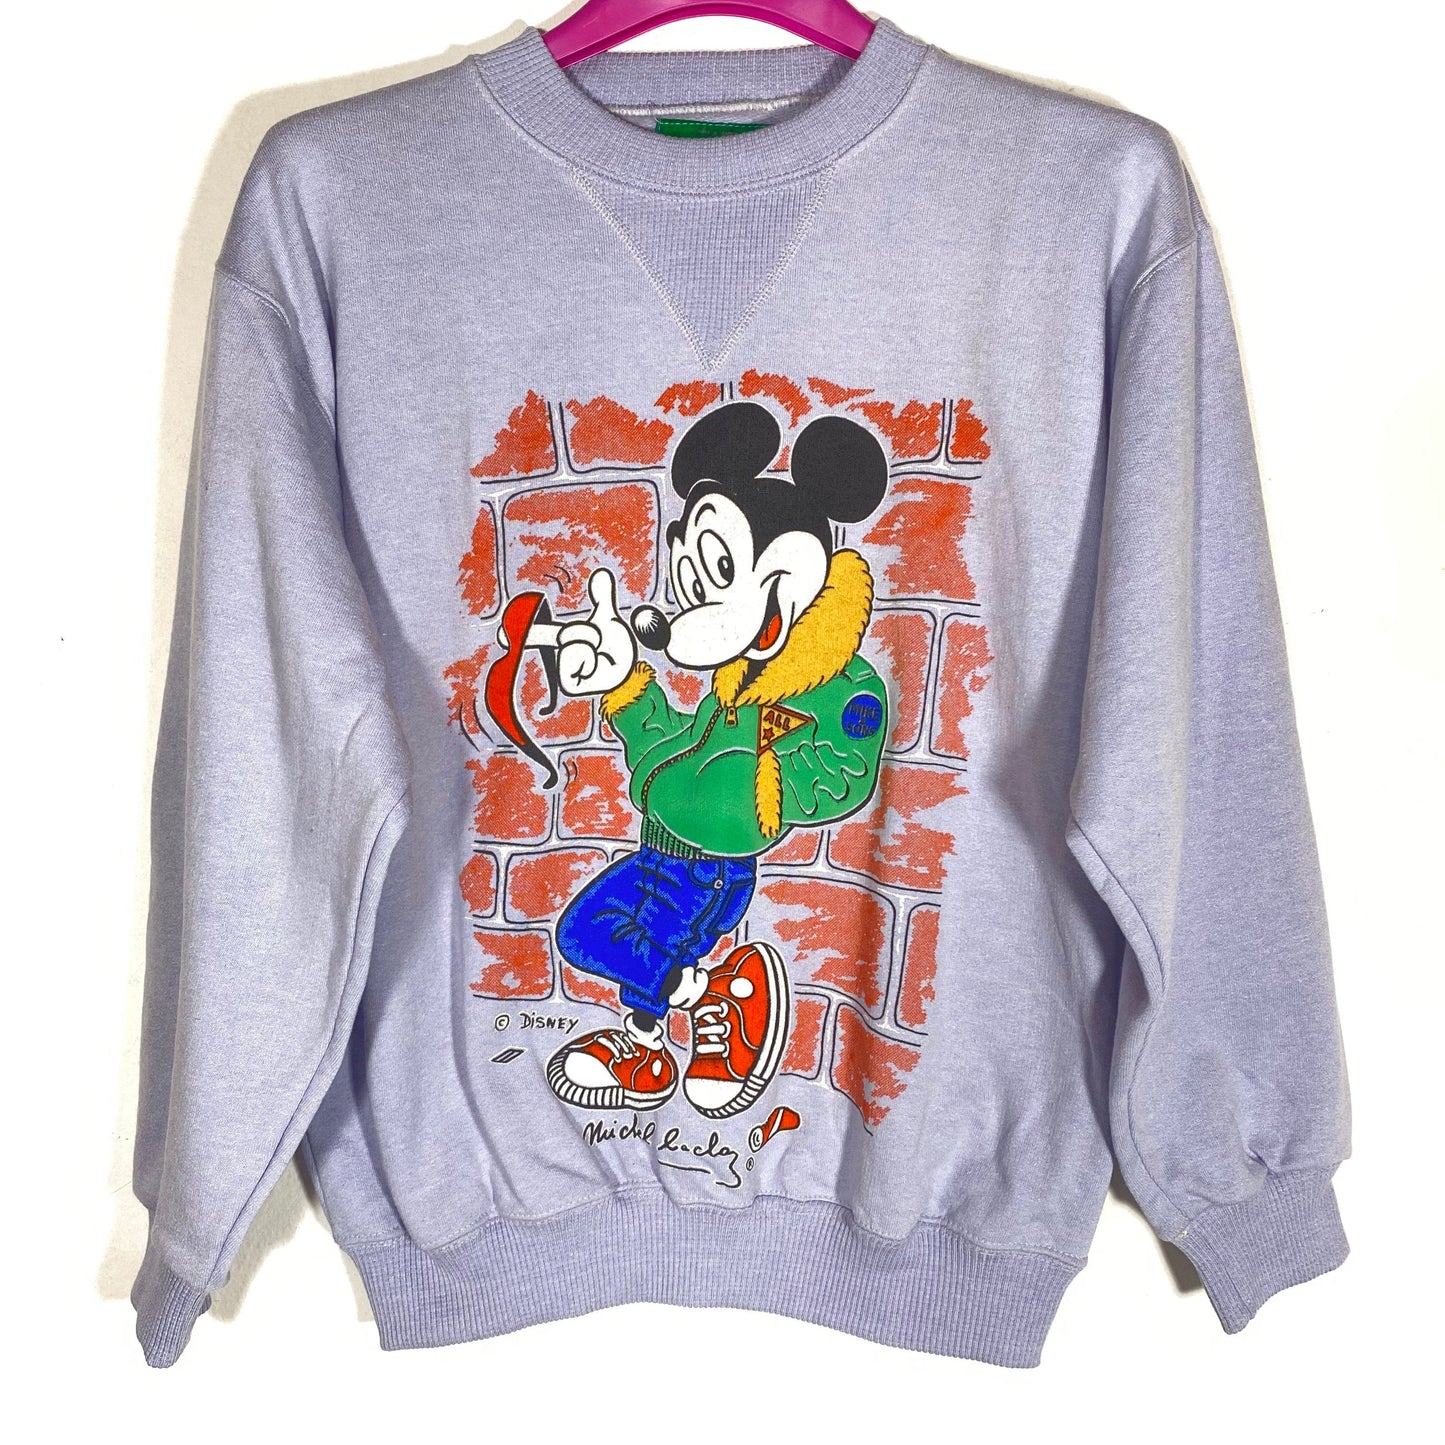 Disney Mickey Mouse sweatshirt by Michel Bachoz, new old stock 80s 2 colors & sizes.